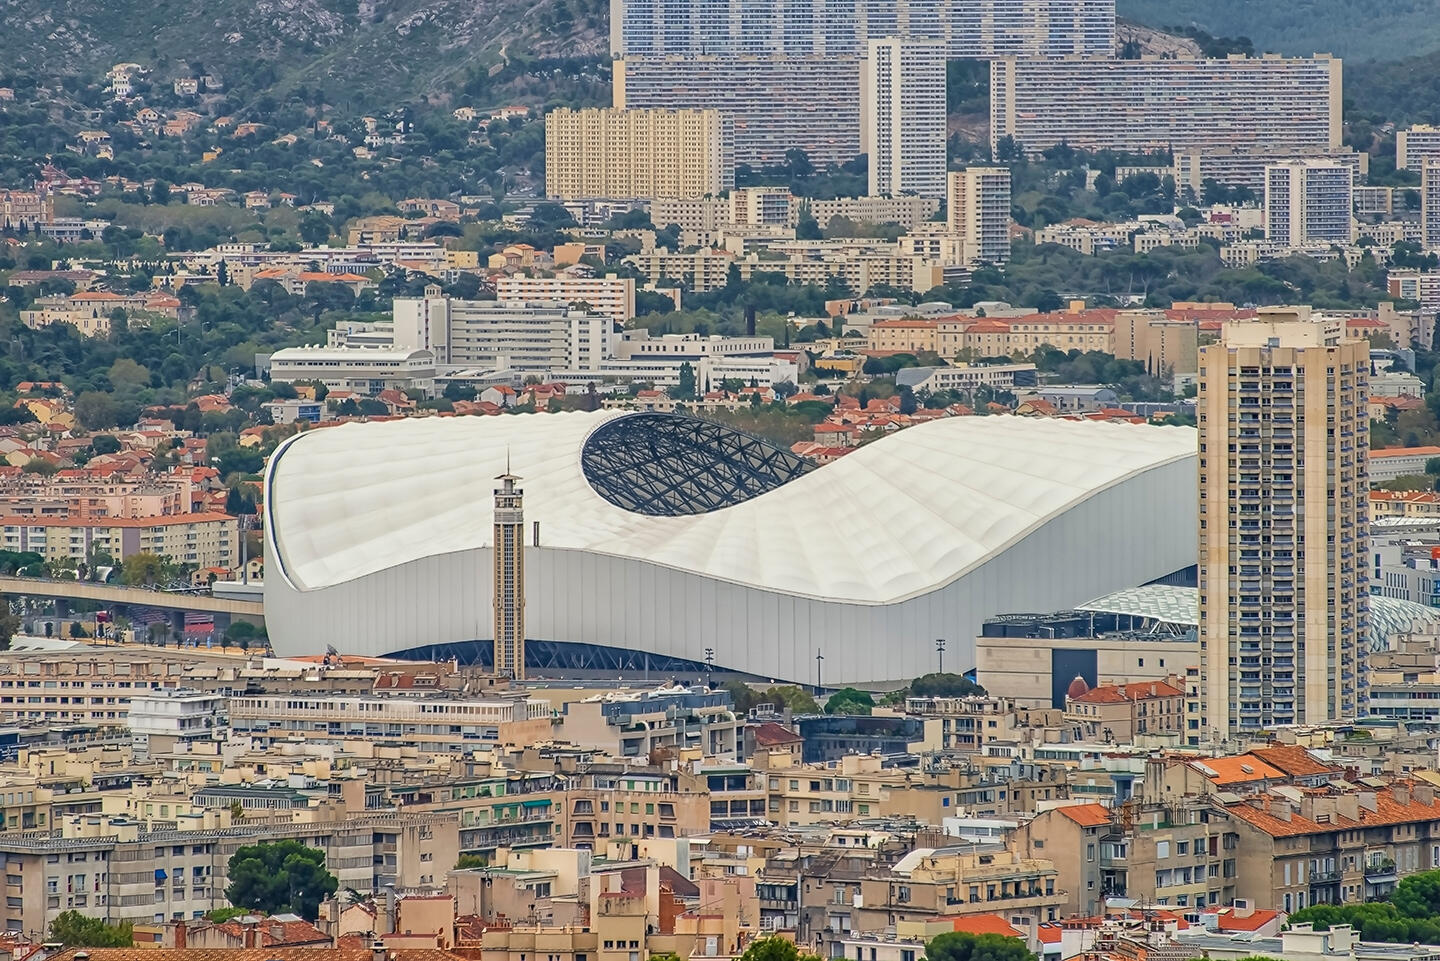 Aerial view of the Stade Vélodrome in Marseille, with its iconic white wave-shaped structure, surrounded by the city's dense urban architecture and hills in the background, suggesting an immersive experience for visitors staying in local aparthotels.